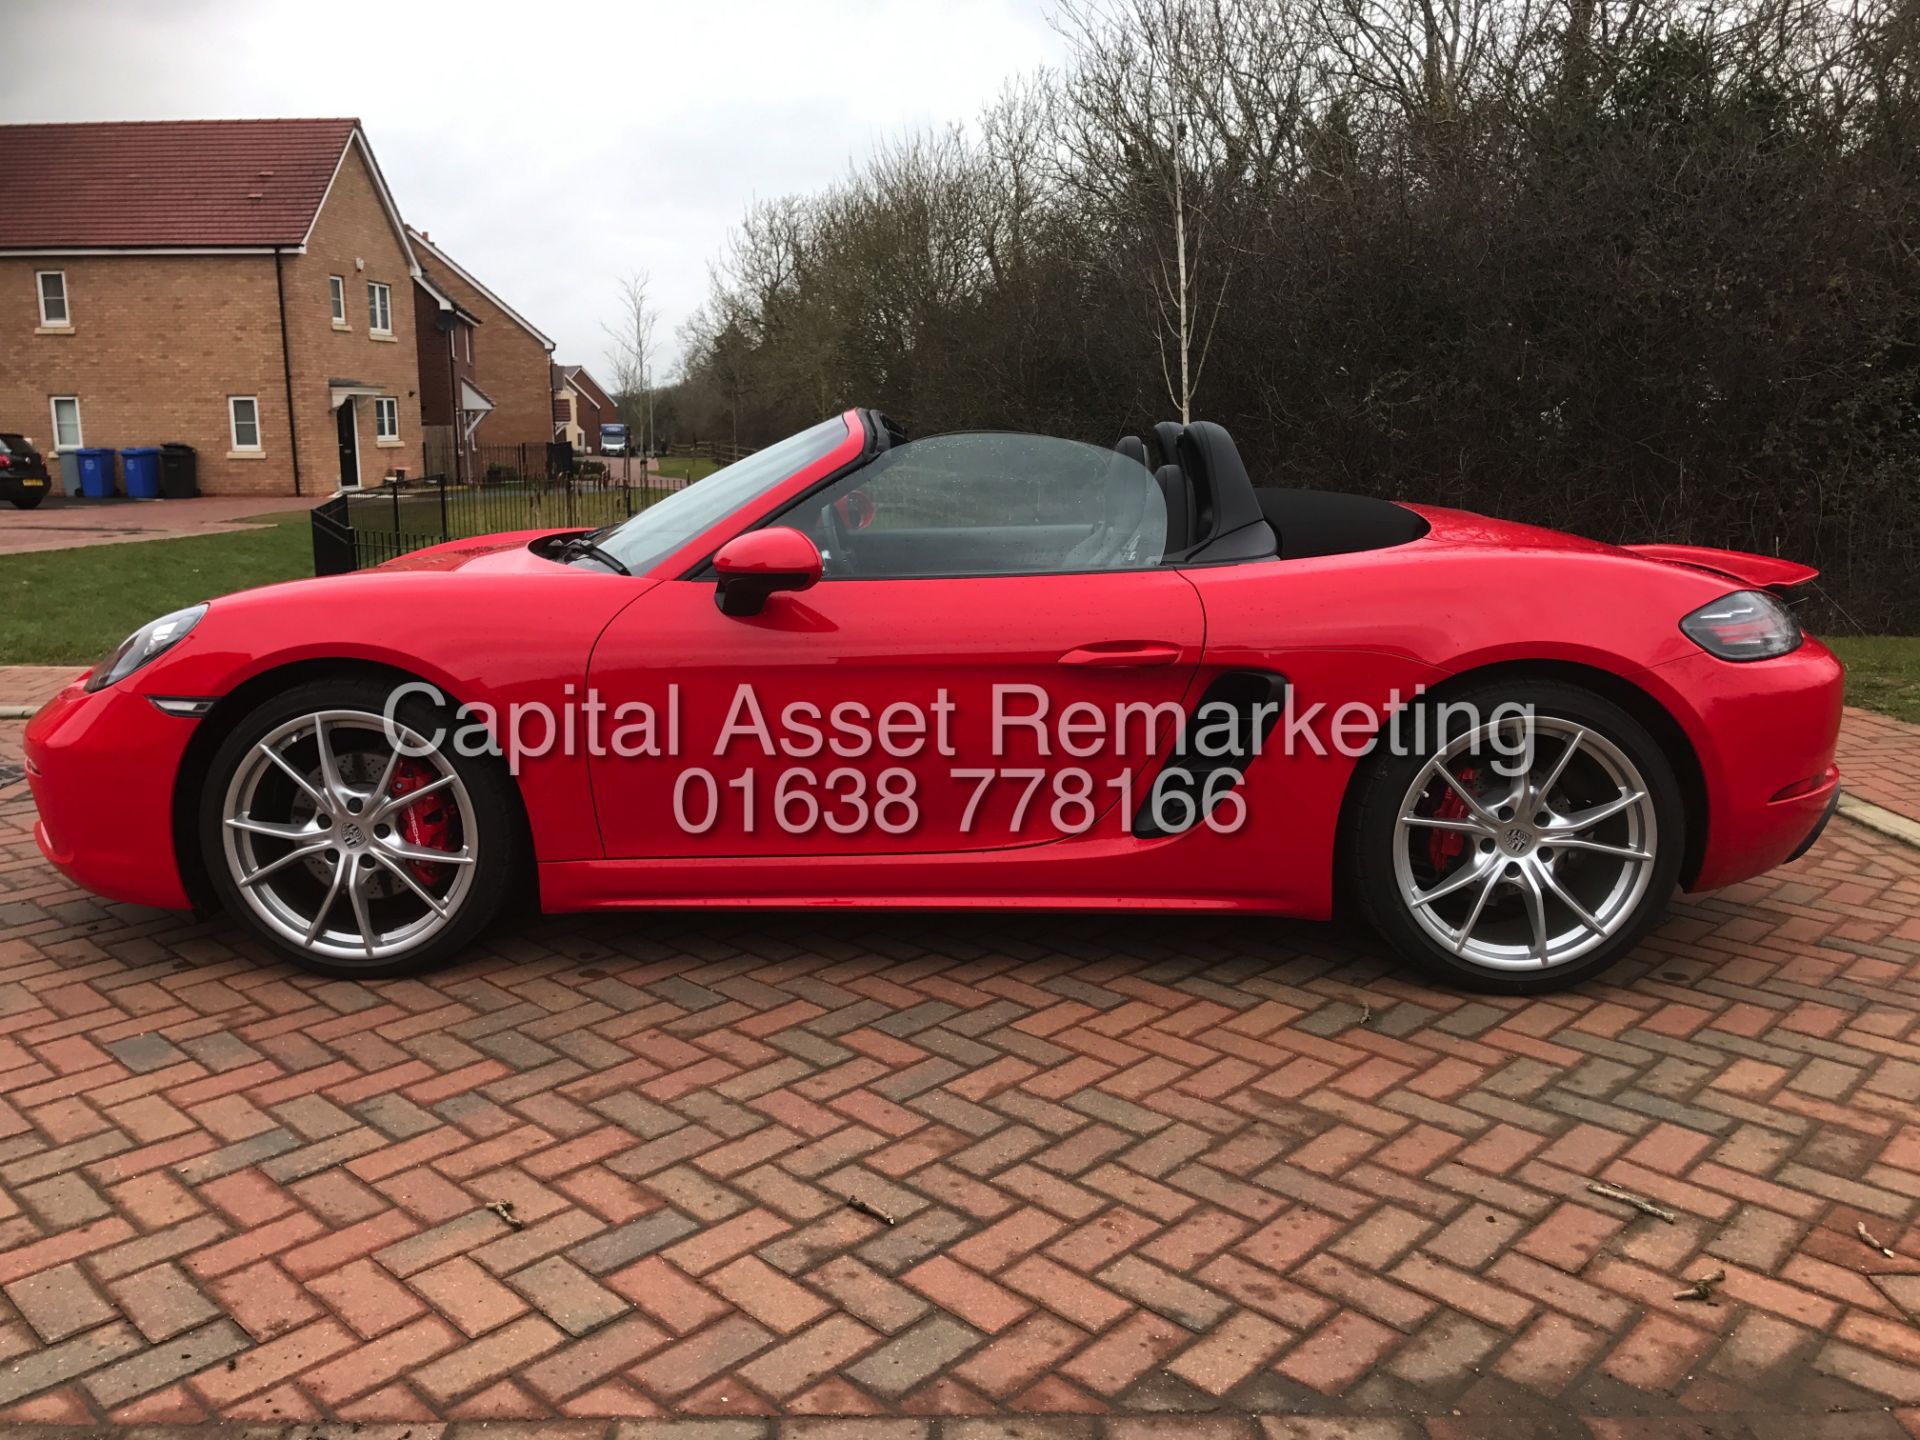 (ON SALE) PORSCHE BOXSTER S (718)CONVERTIBLE (17REG) NEW SHAPE-350 BHP-PDK AUTO' (1 OWNER-LOW MILES) - Image 11 of 34